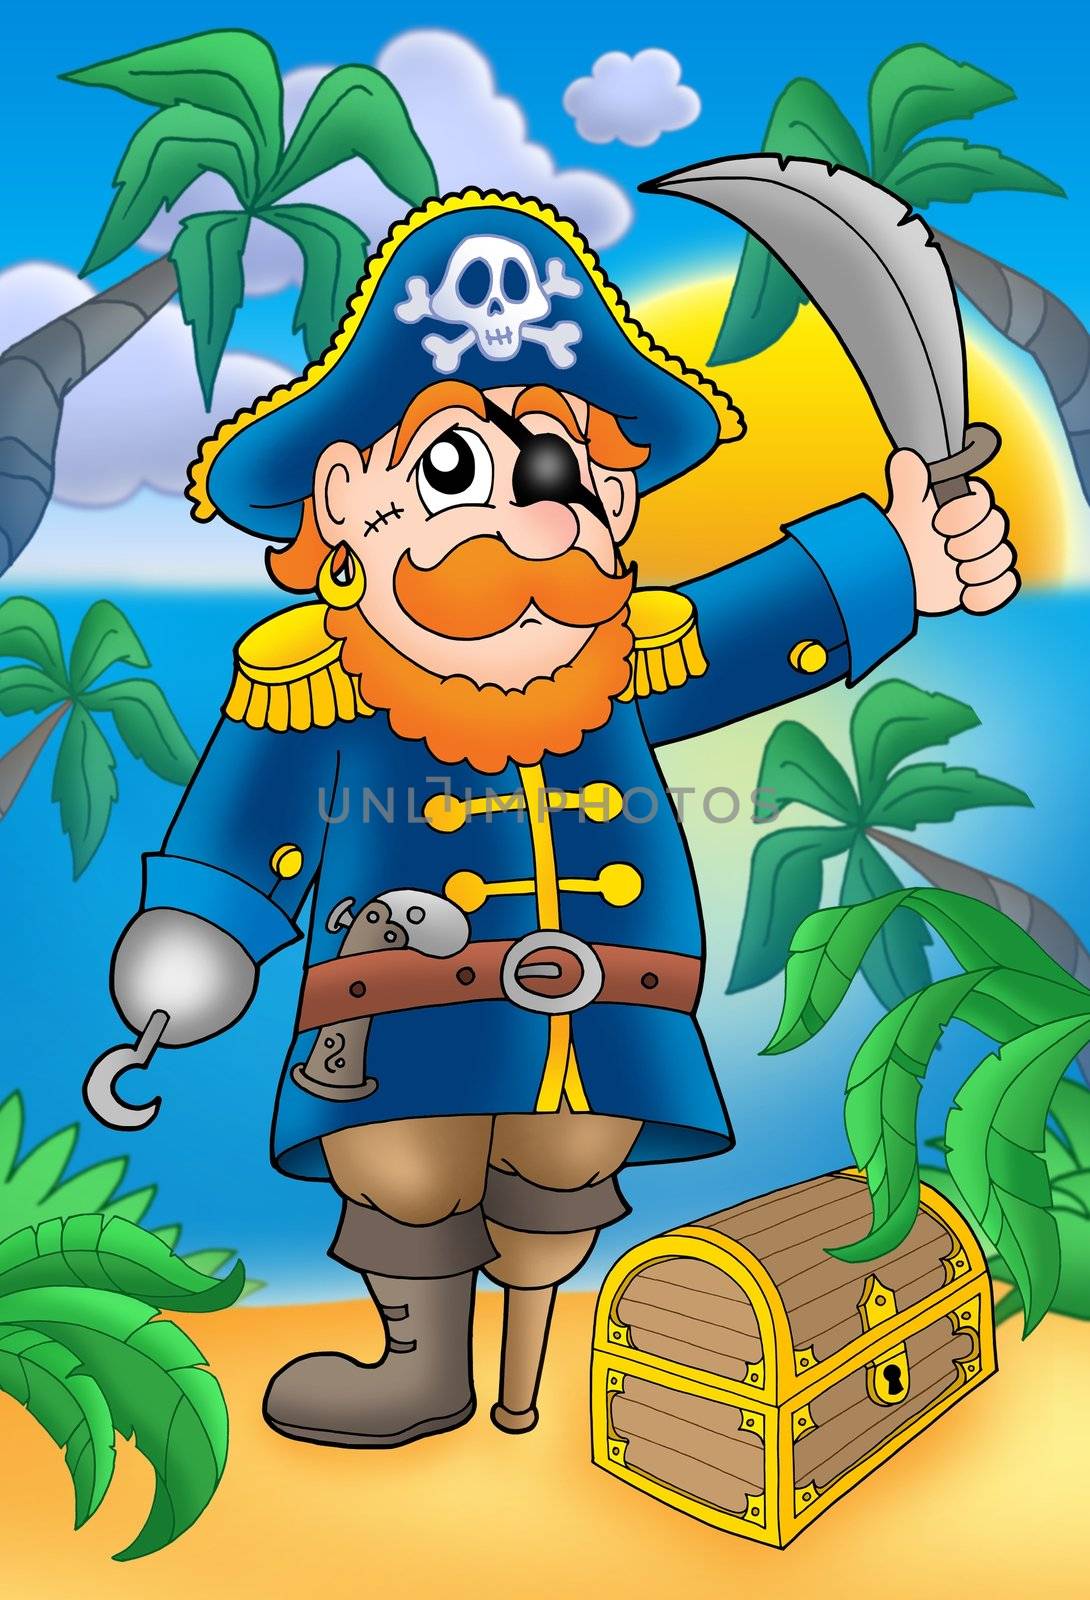 Pirate with sabre and treasure chest - color illustration.